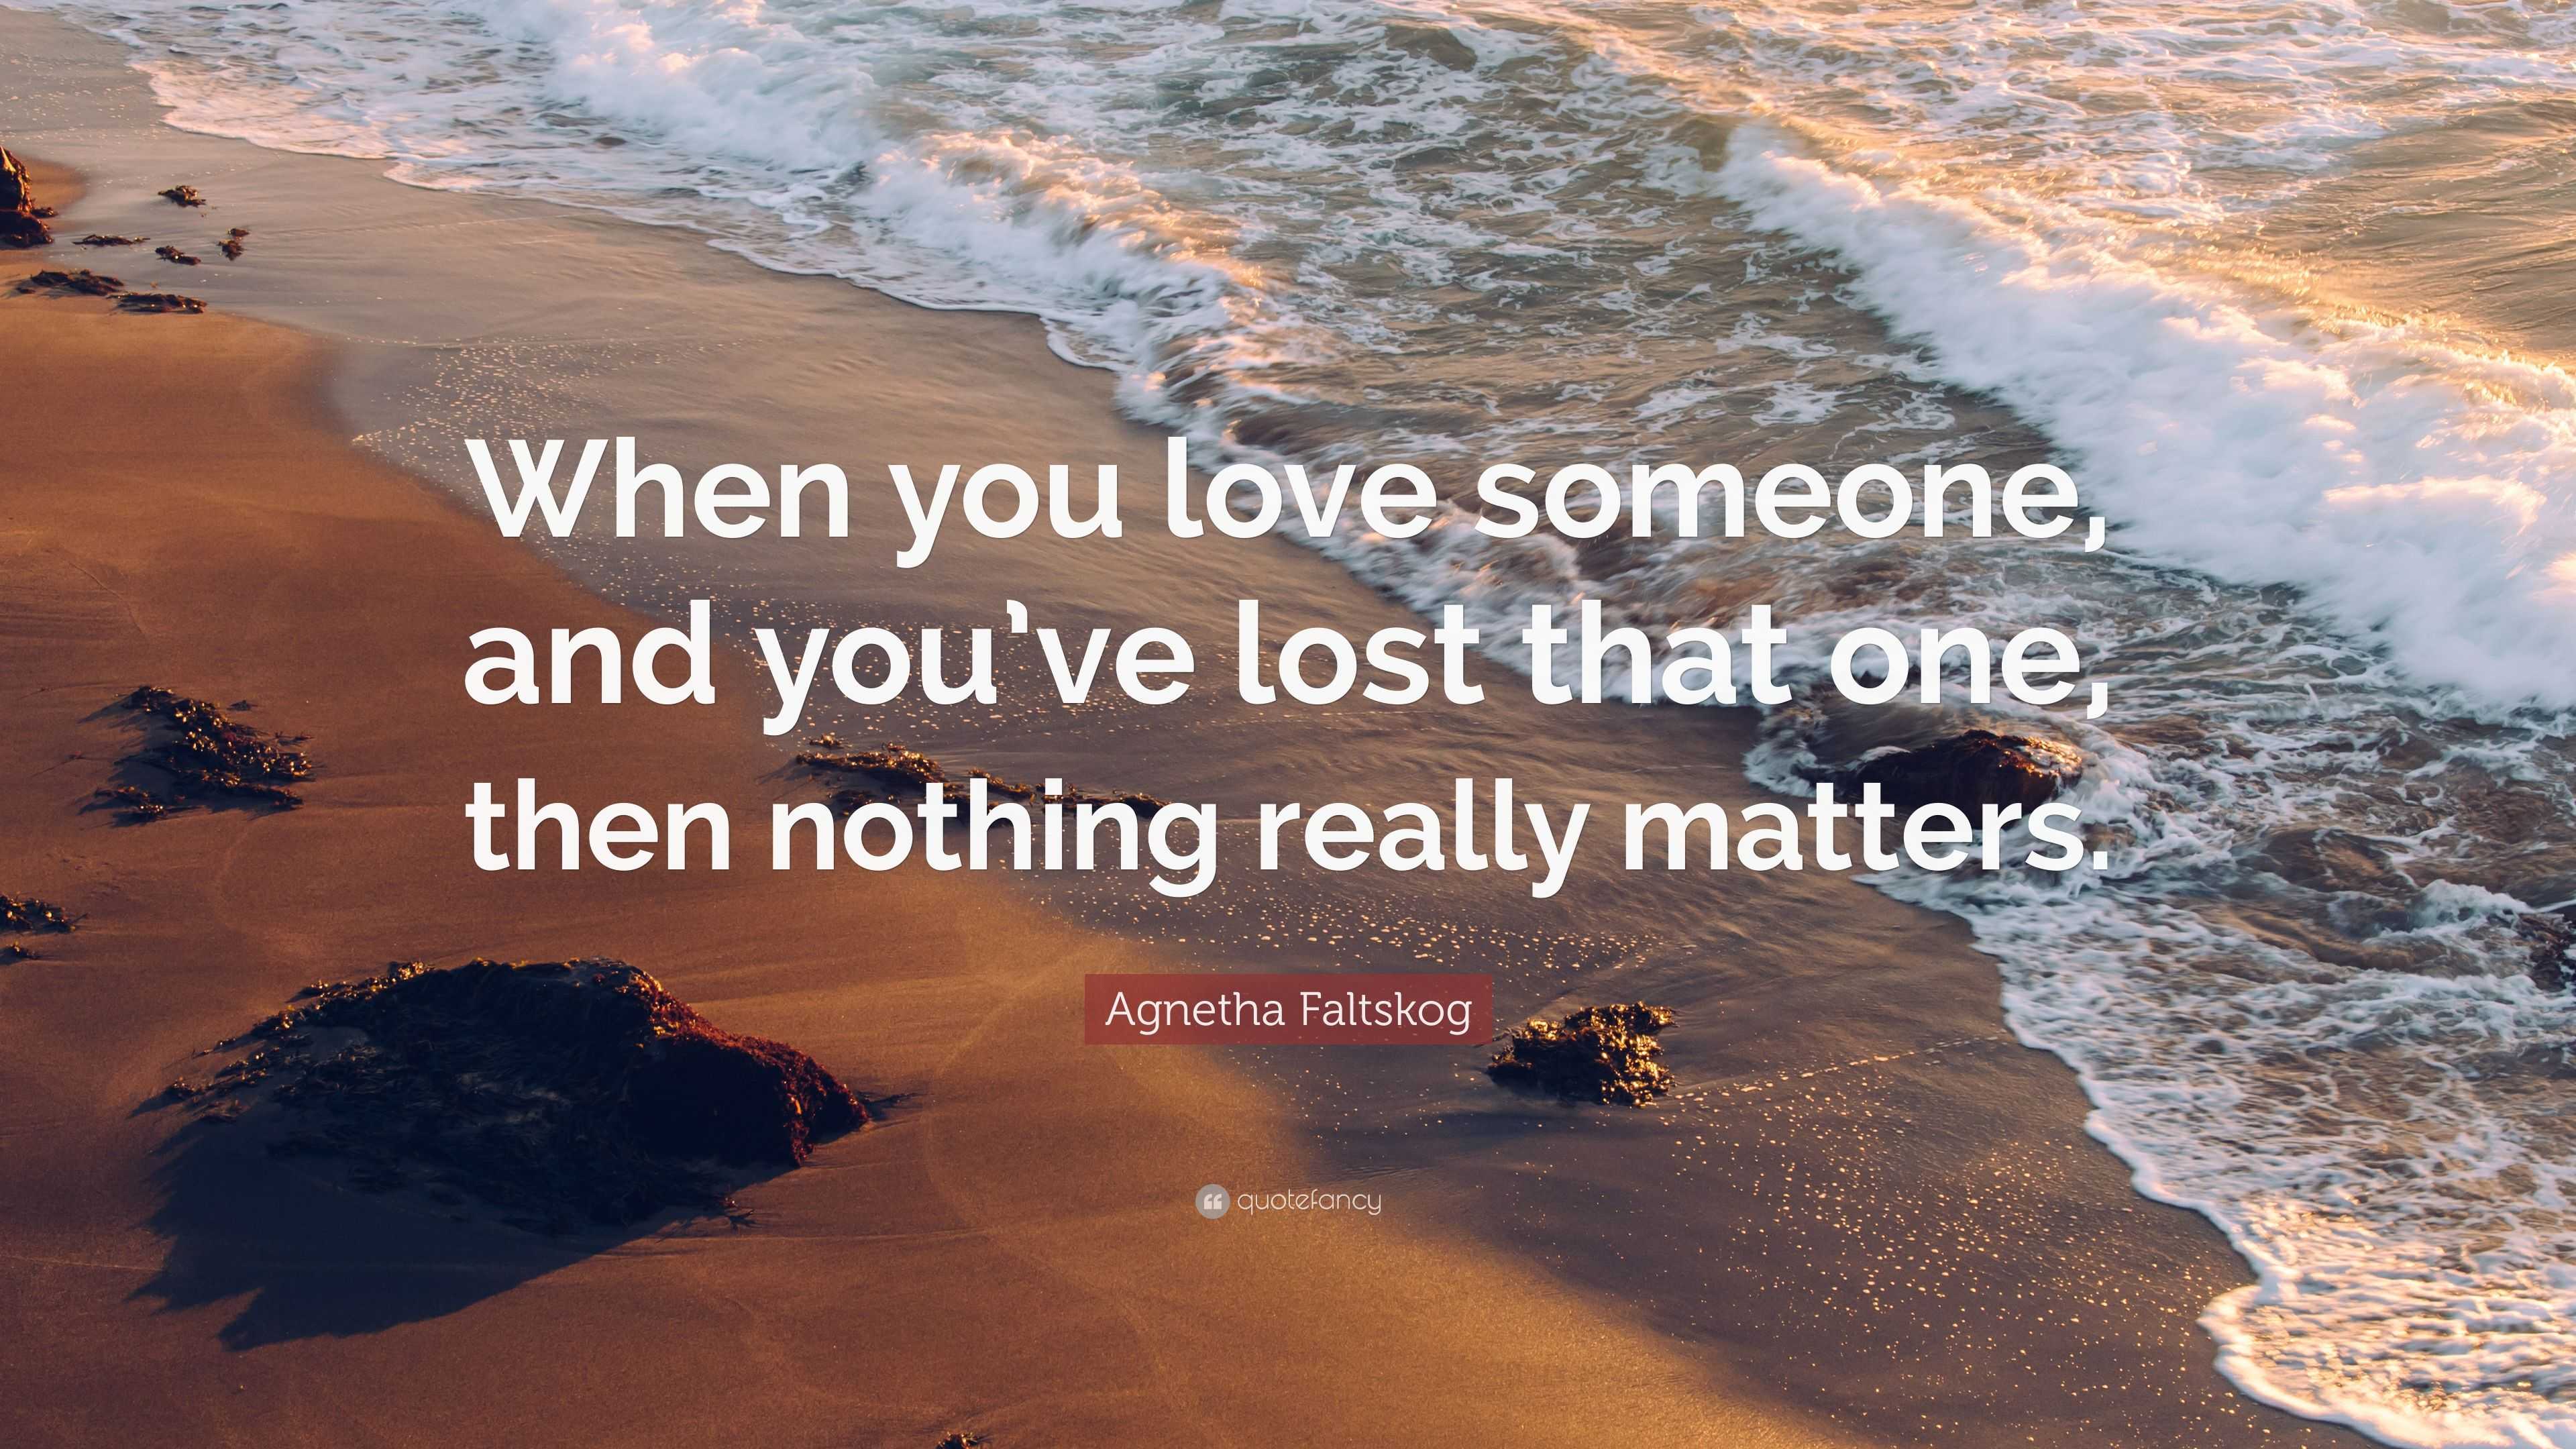 Agnetha Faltskog Quote: “When you love someone, and you’ve lost that ...